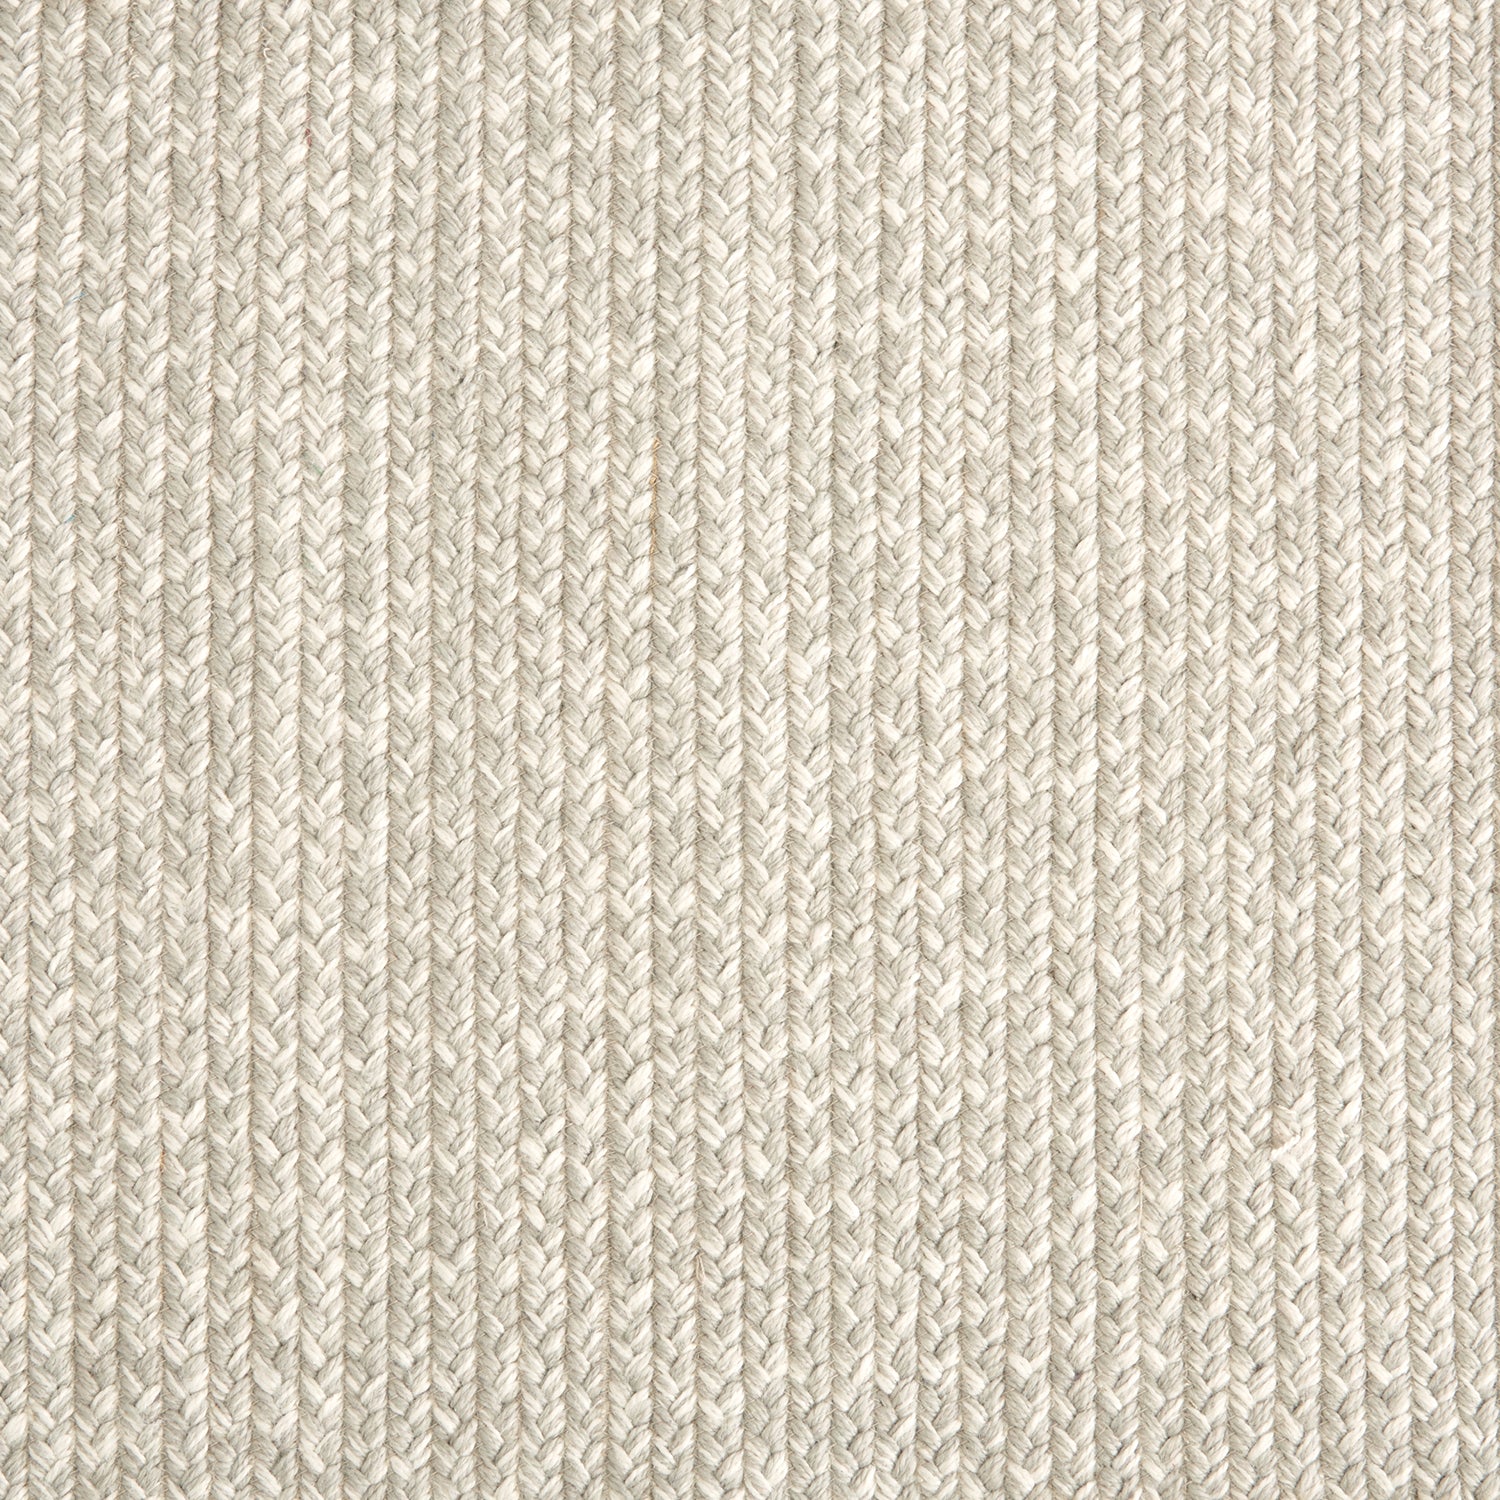 Outdoor broadloom carpet swatch in a chunky ribbed weave in mottled cream and silver.